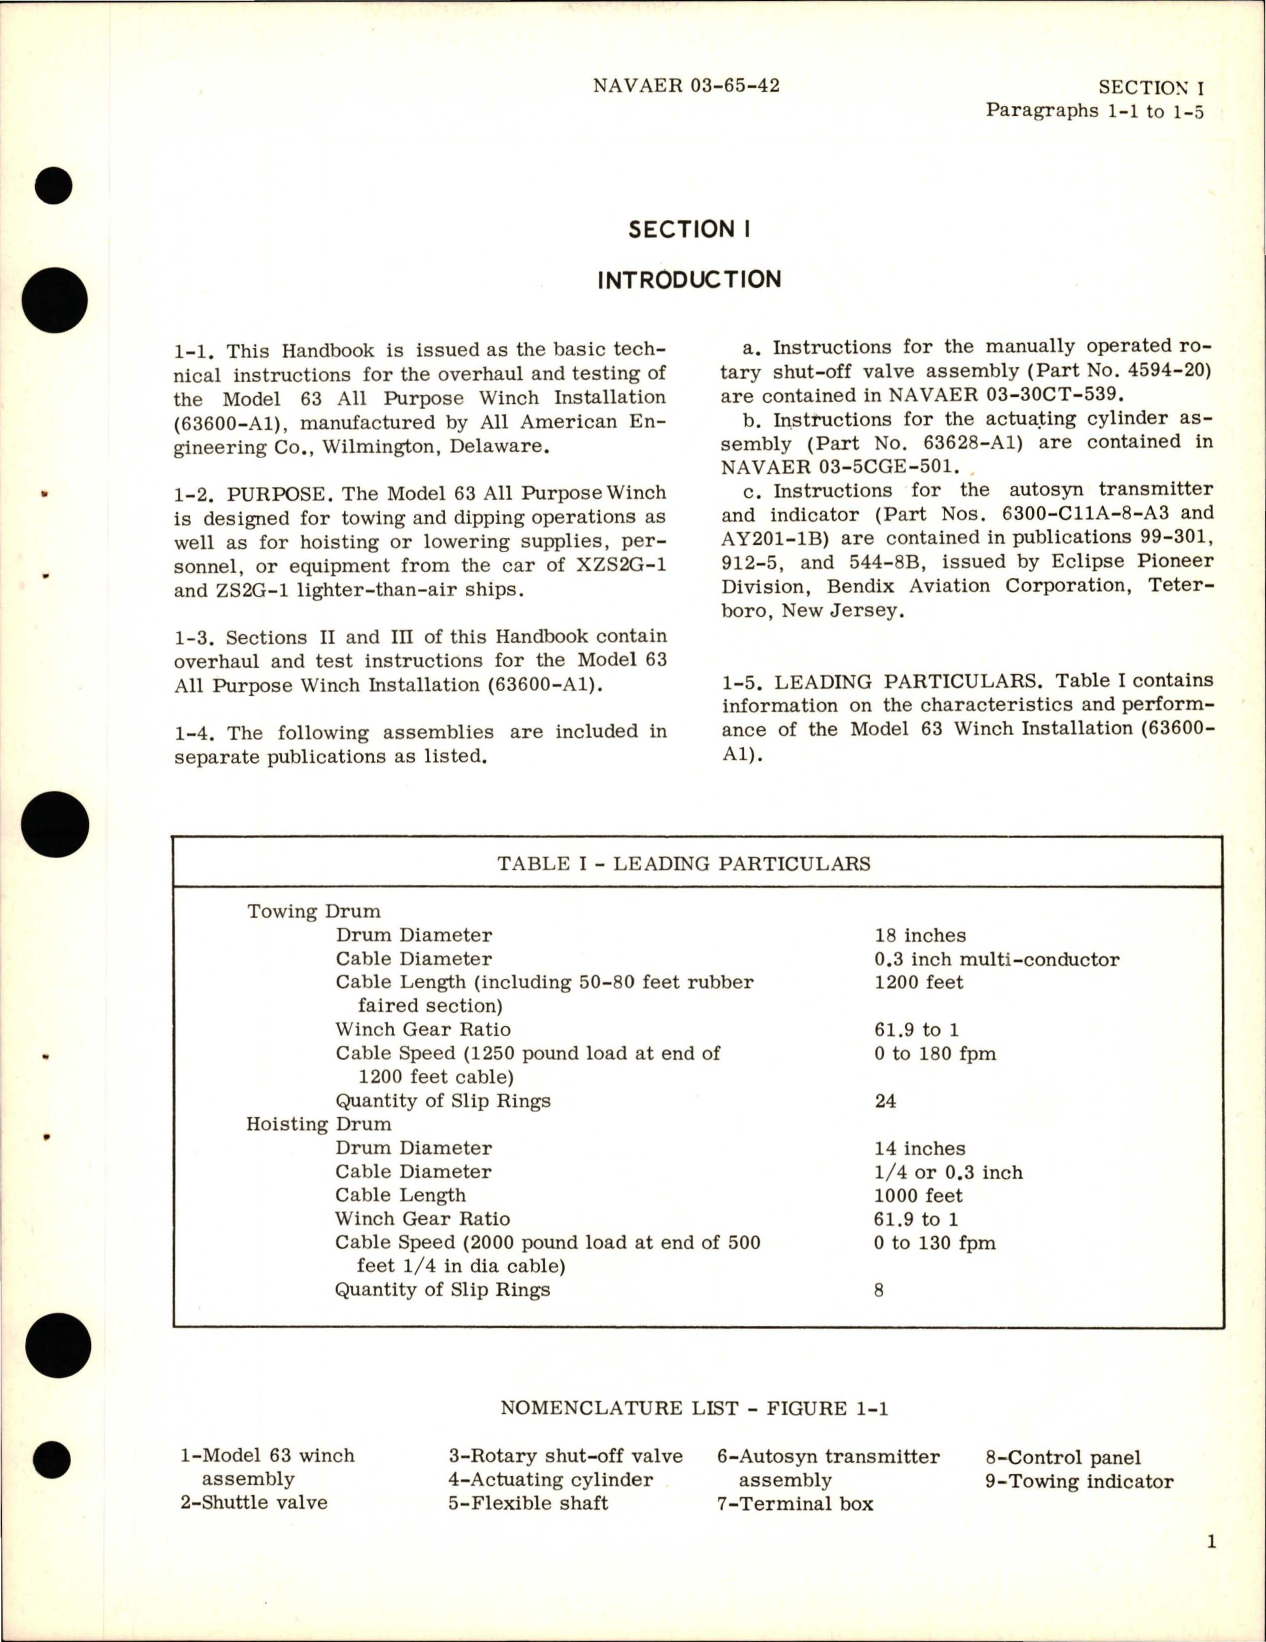 Sample page 5 from AirCorps Library document: Overhaul Instructions for All Purpose Winch - Model 63